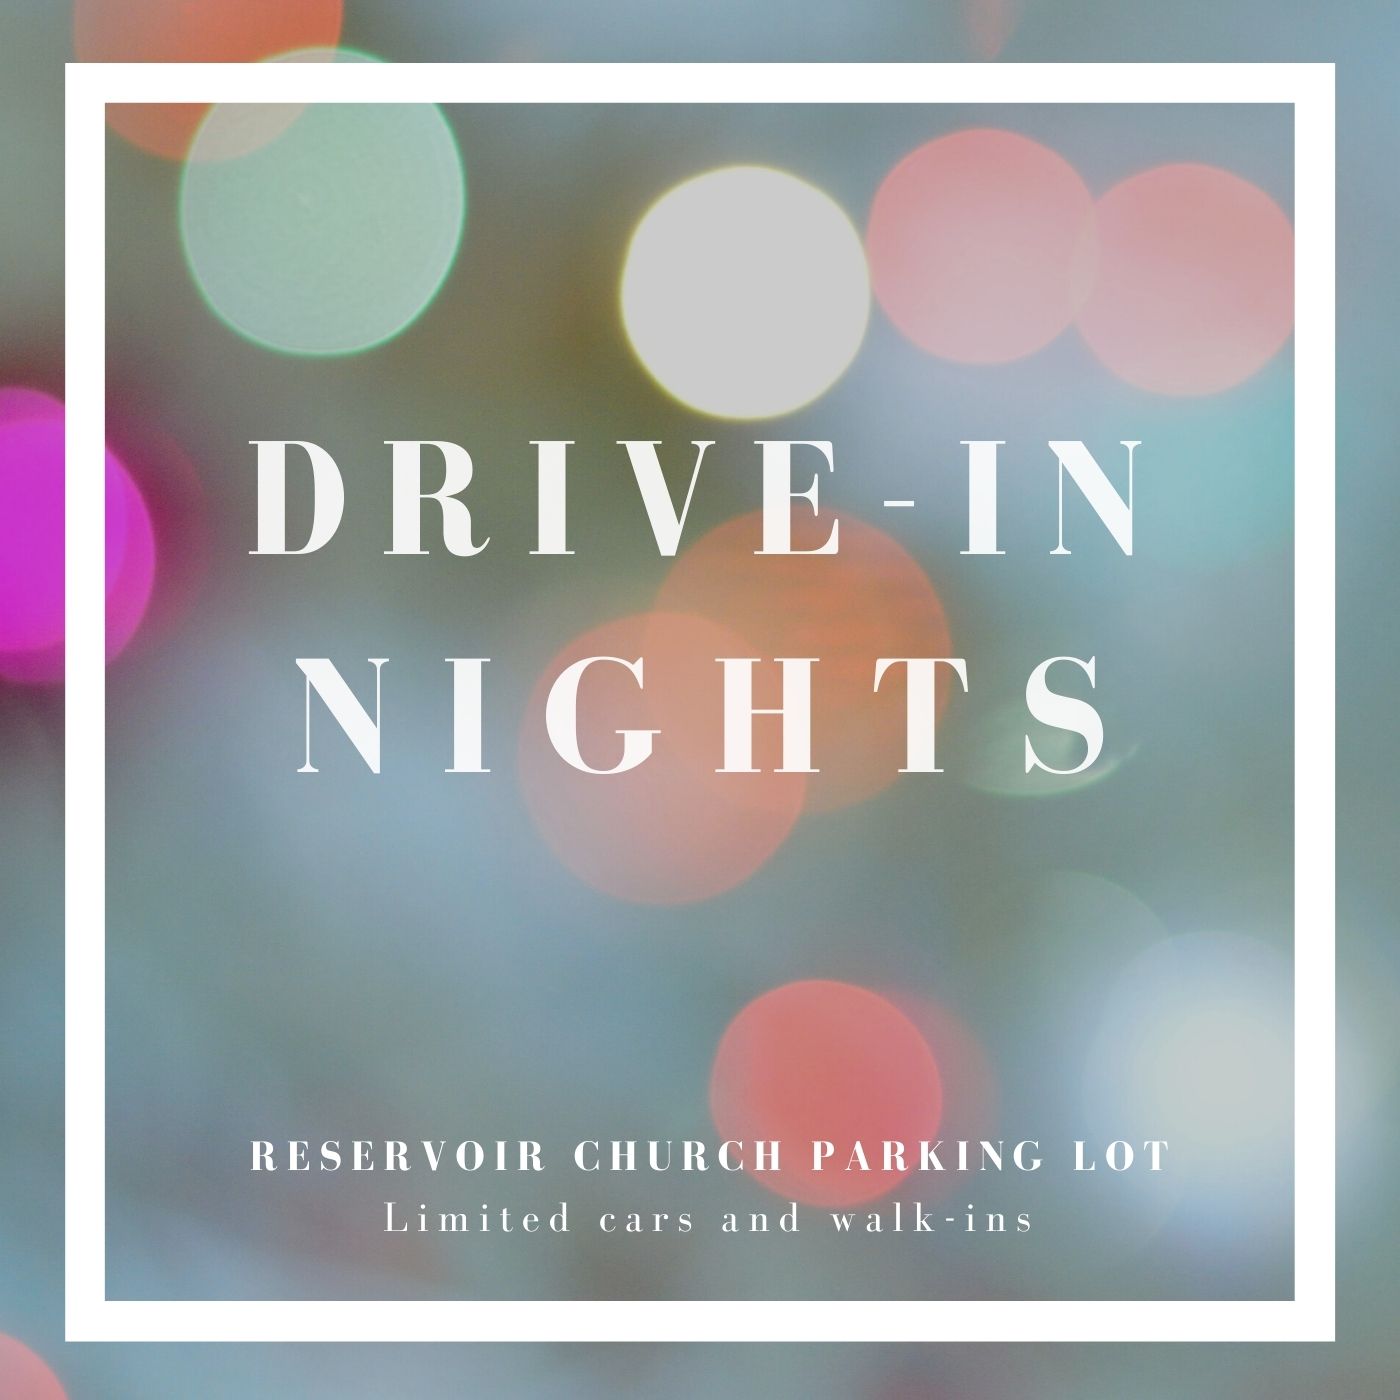 Tinted multicolor dots against grey background. Text reads "Drive-In Nights, Reservoir Church Parking Lot."